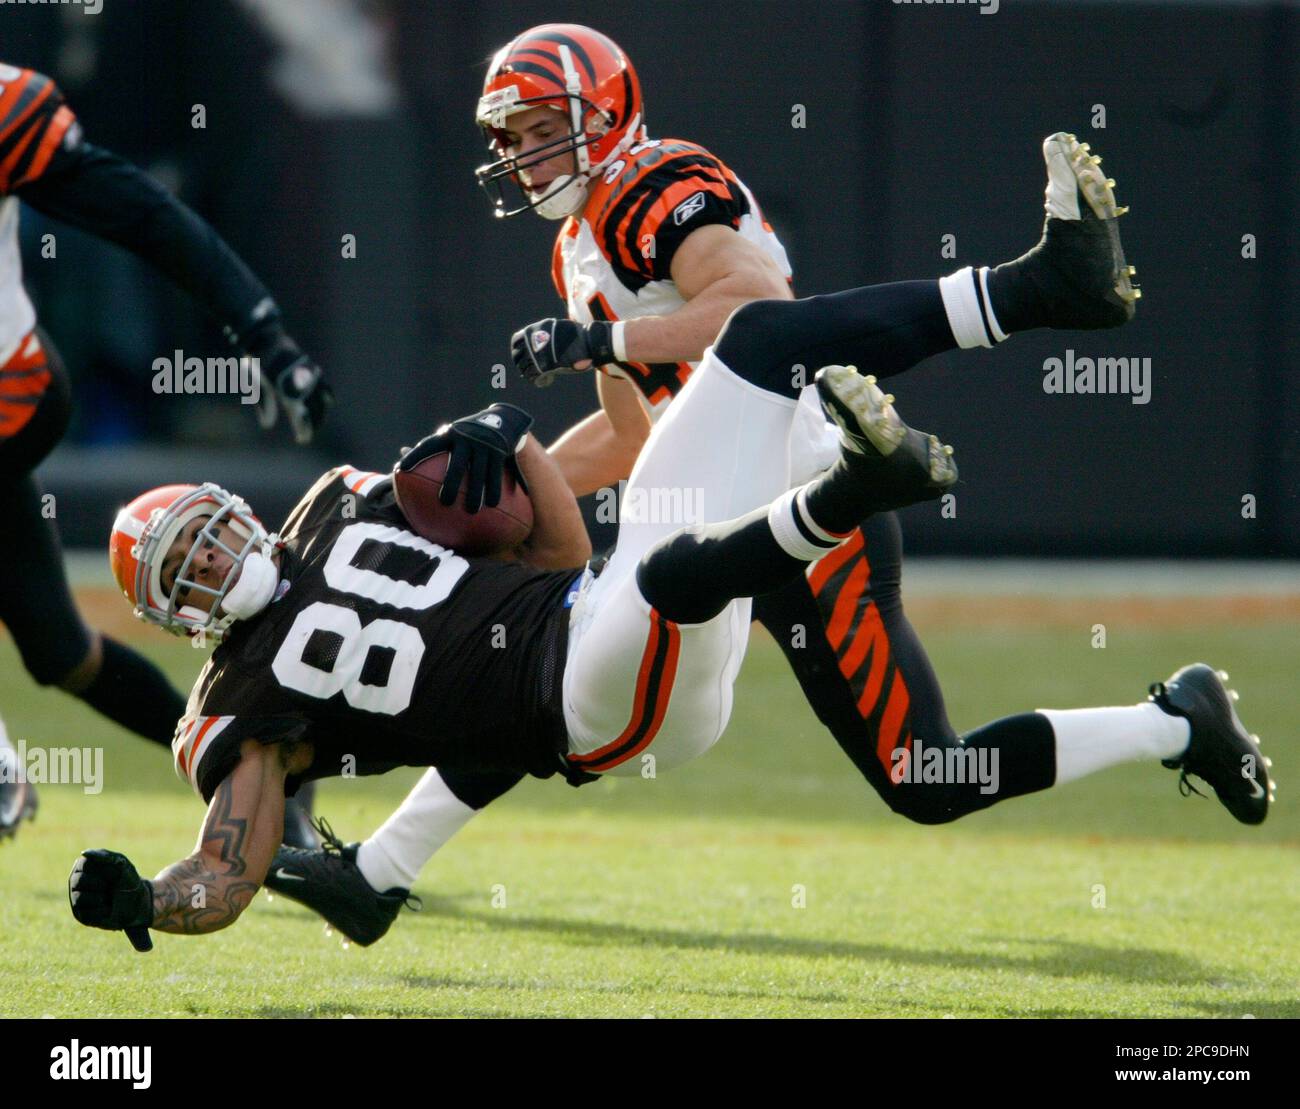 Cleveland Browns tight end Kellen Winslow Jr. (80) is upended after a  5-yard reception during third-quarter action against the Cincinnati Bengals  in their NFL football game in Cleveland on Sunday, Nov. 26,